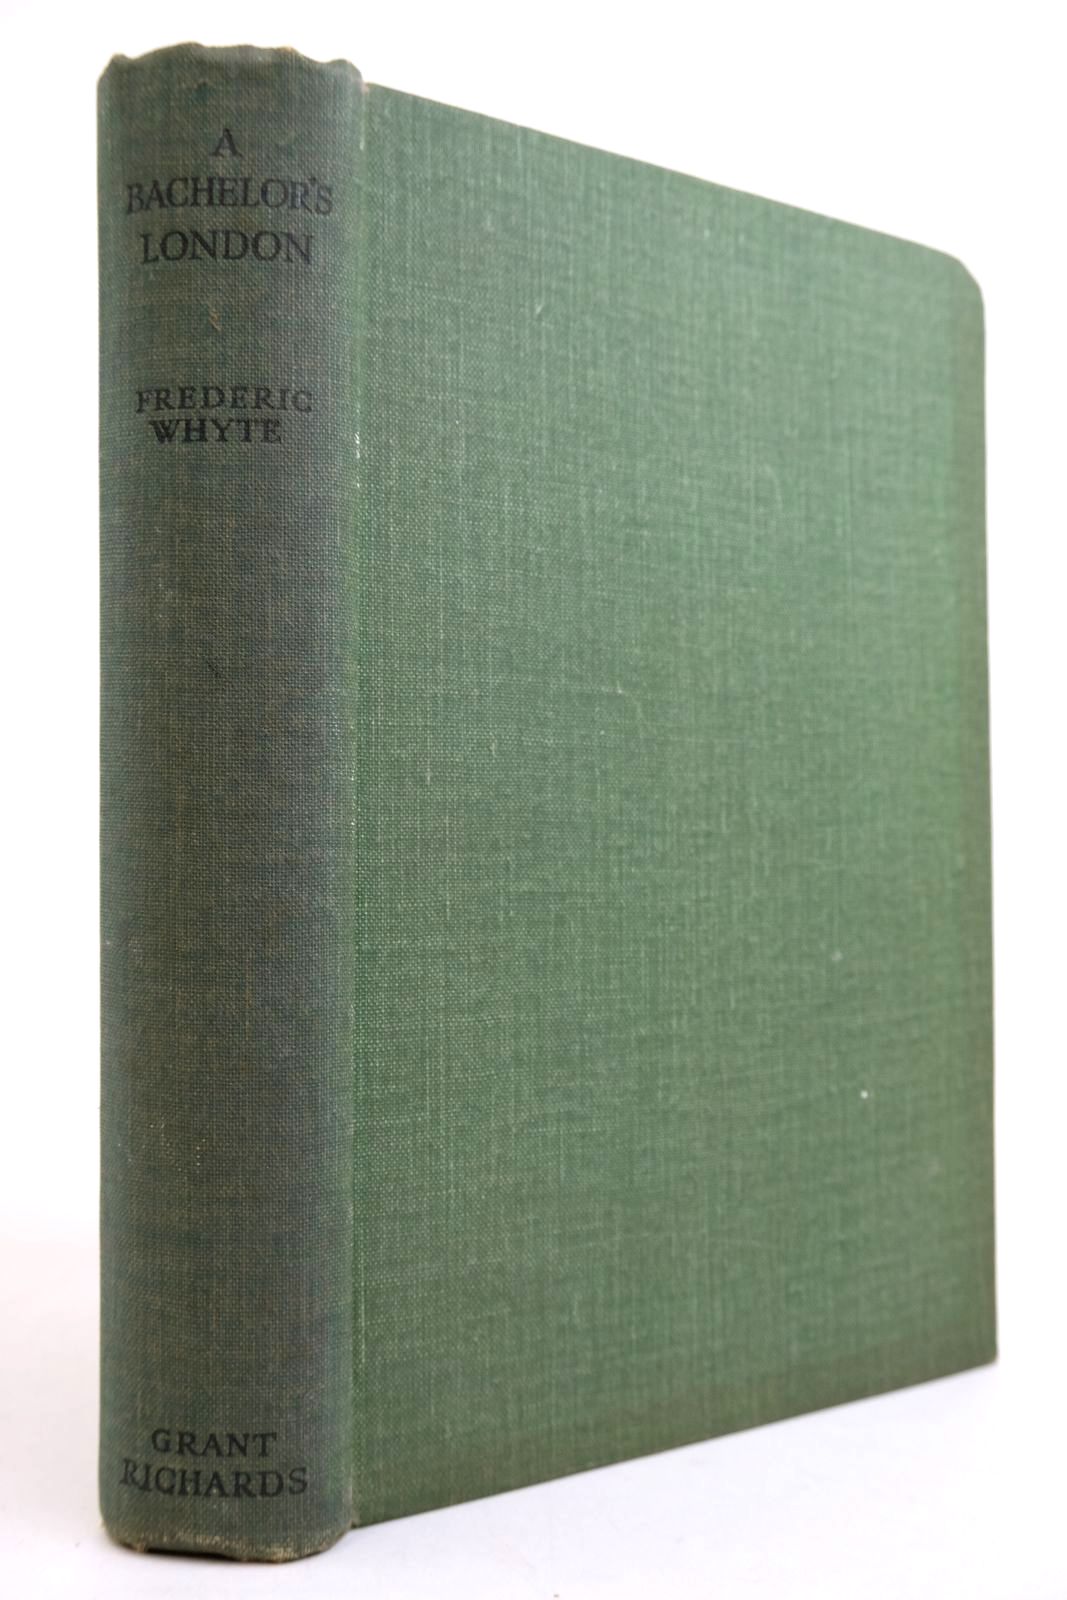 Photo of A BACHELOR'S LONDON written by Whyte, Frederic published by Grant Richards (STOCK CODE: 2134327)  for sale by Stella & Rose's Books